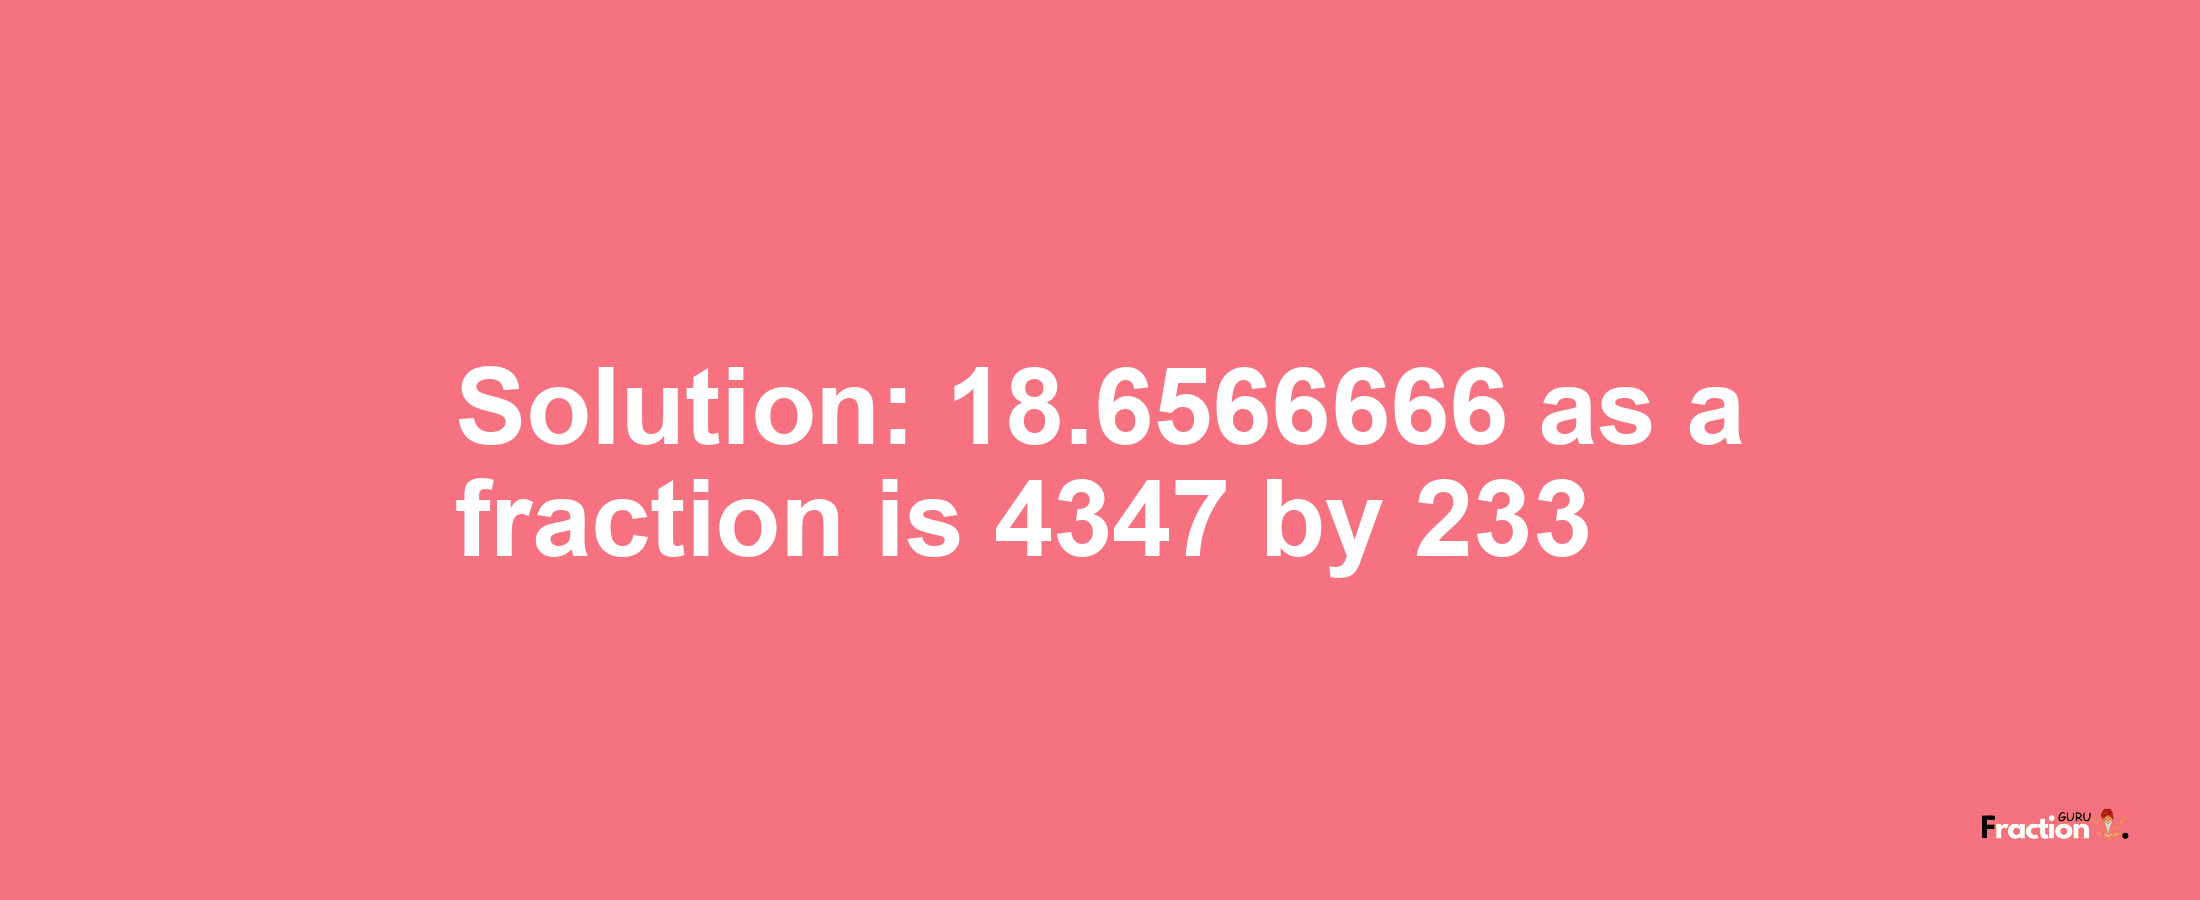 Solution:18.6566666 as a fraction is 4347/233